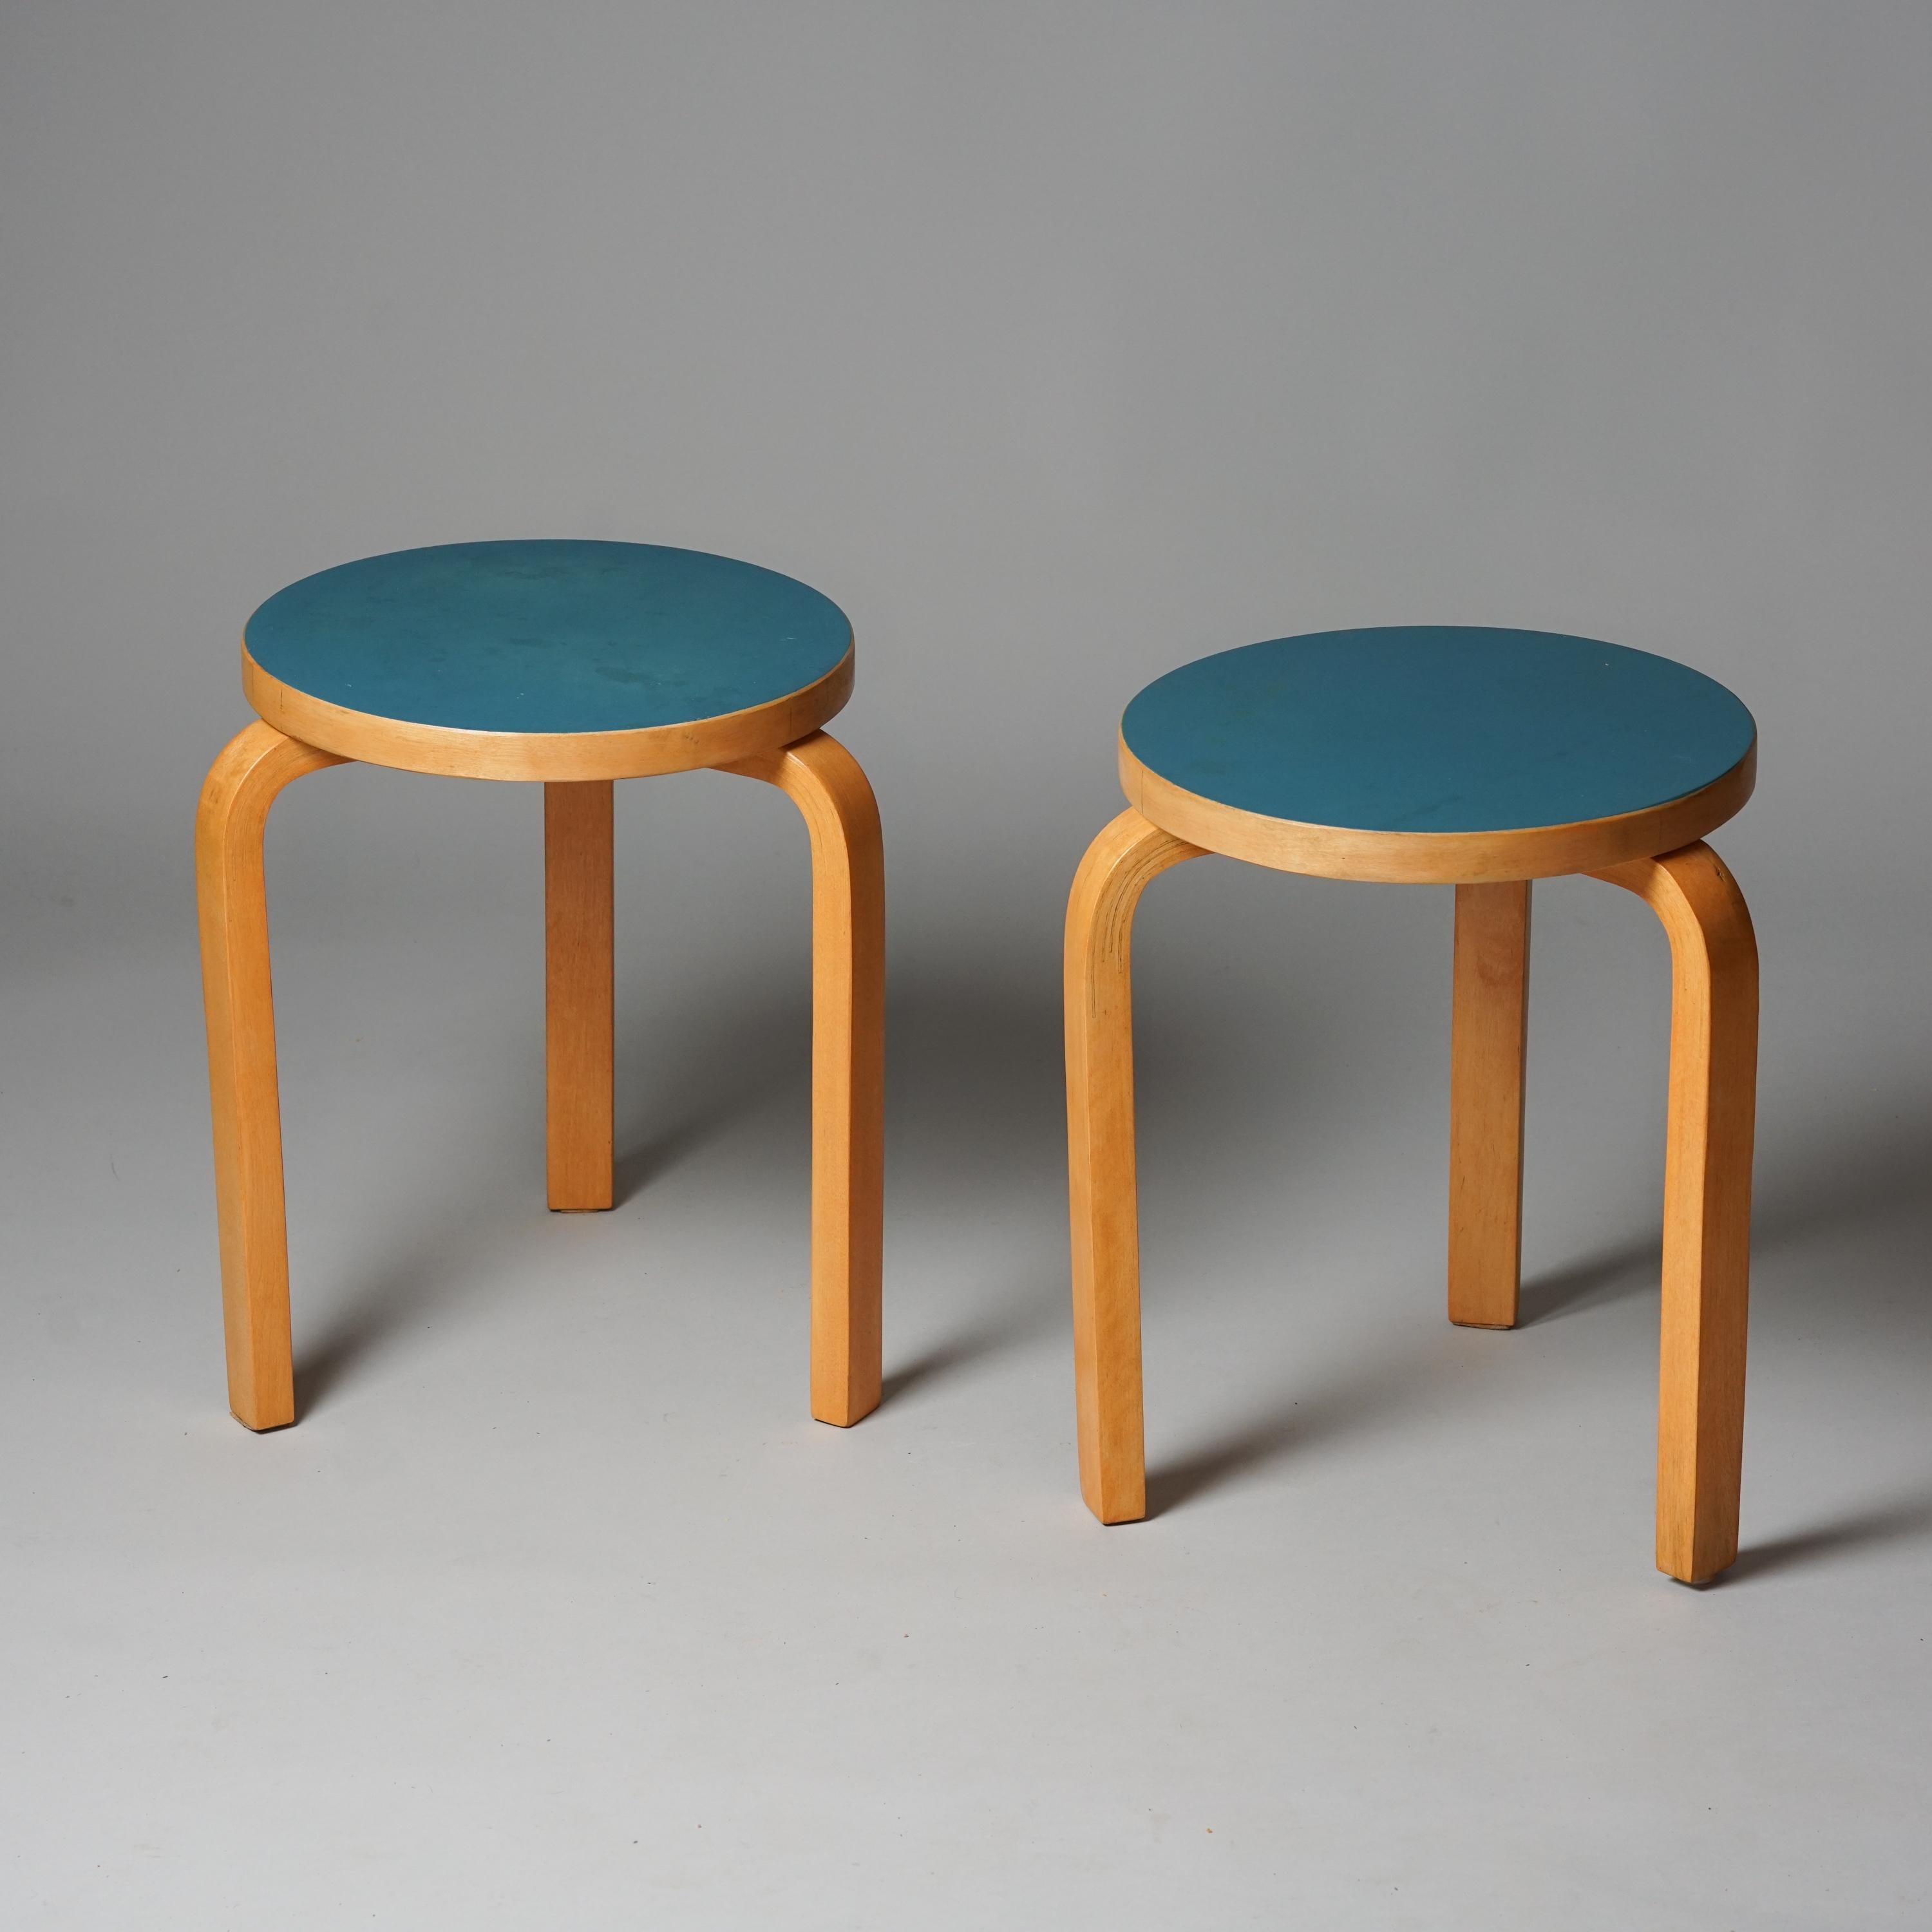 Pair of turquoise model 60 stools, designed by Alvar Aalto, manufactured by Oy Huonekalu- ja Rakennustyötehdas Ab, 1950s/1960s. Birch frame with turquoise linoleum top. Good vintage condition, minor patina consistent with age and use. The stools are